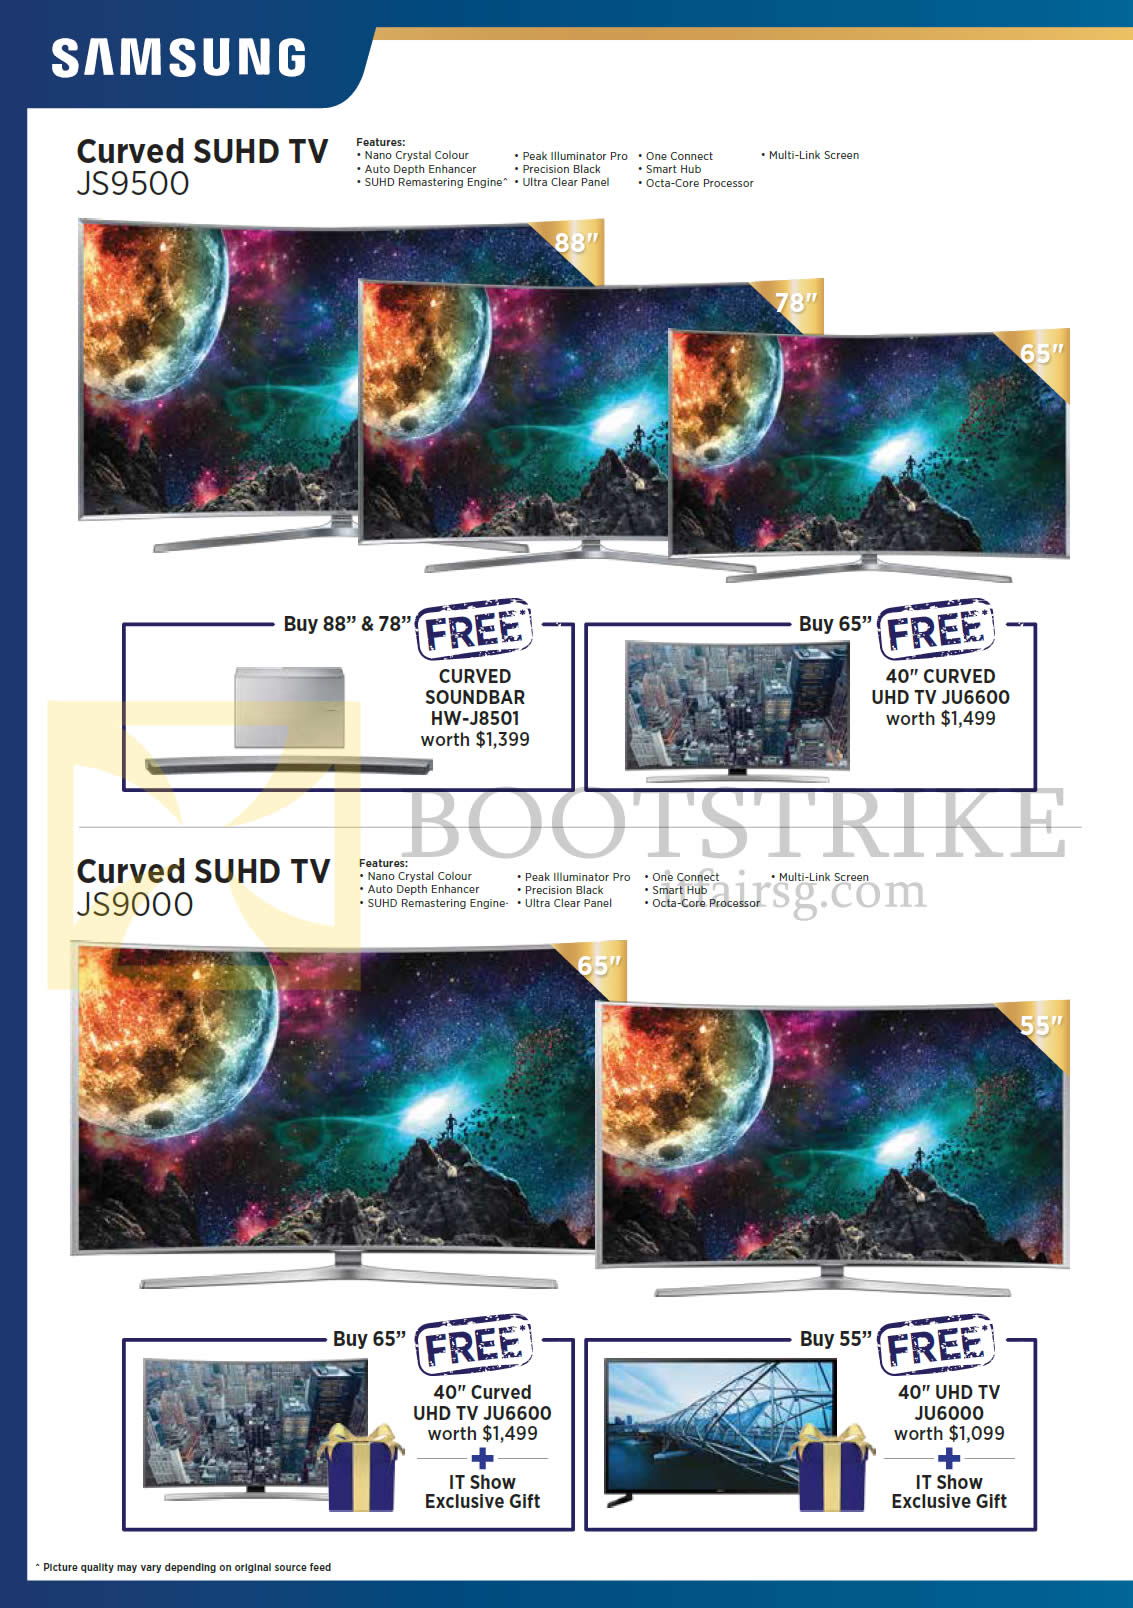 IT SHOW 2016 price list image brochure of Samsung TVs (No Prices) Curved UHD JS9500, JS9000